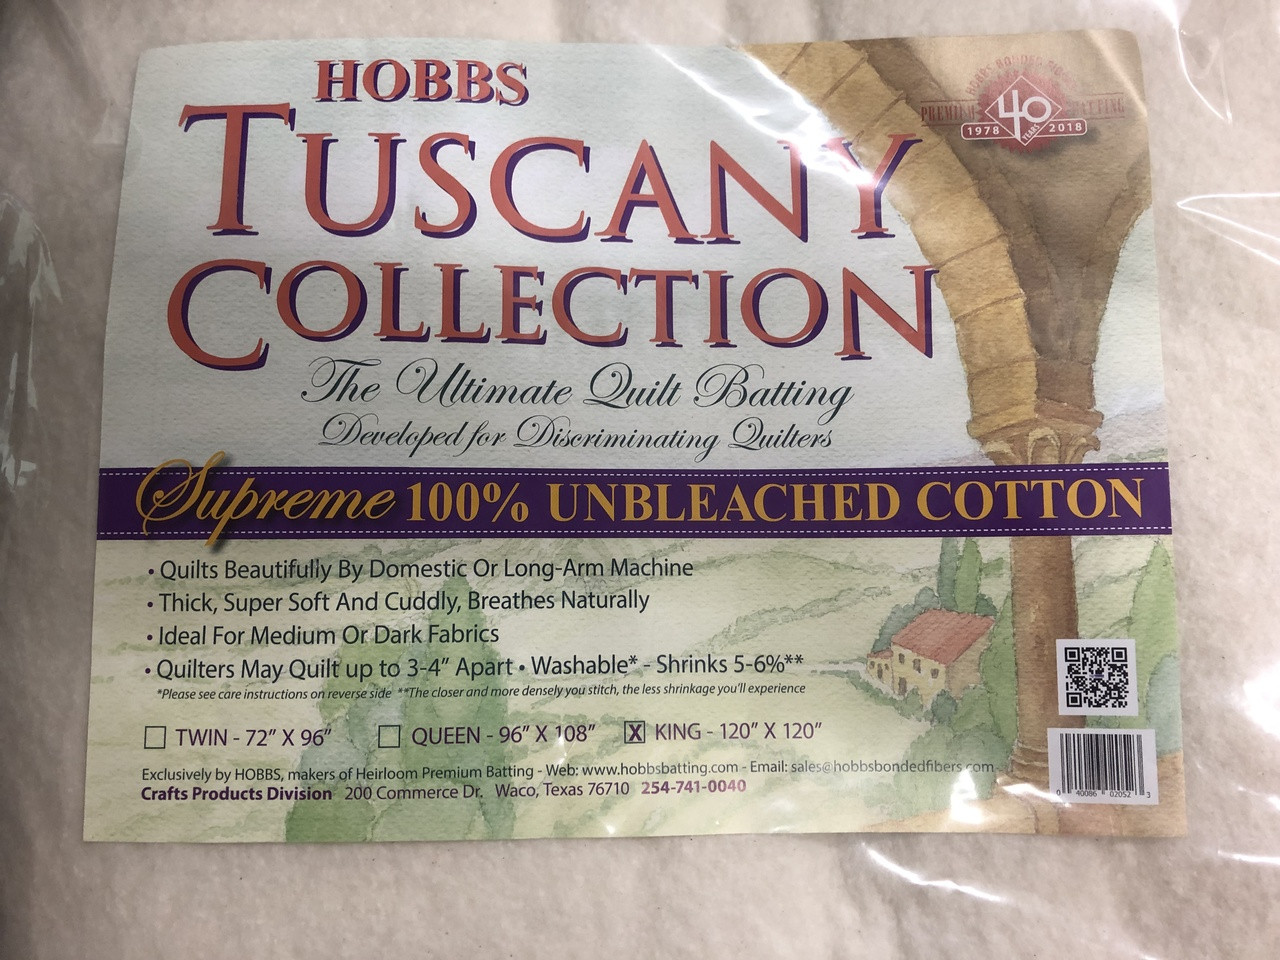 Hobbs Tuscany 100% Bleached Cotton Quilt Batting